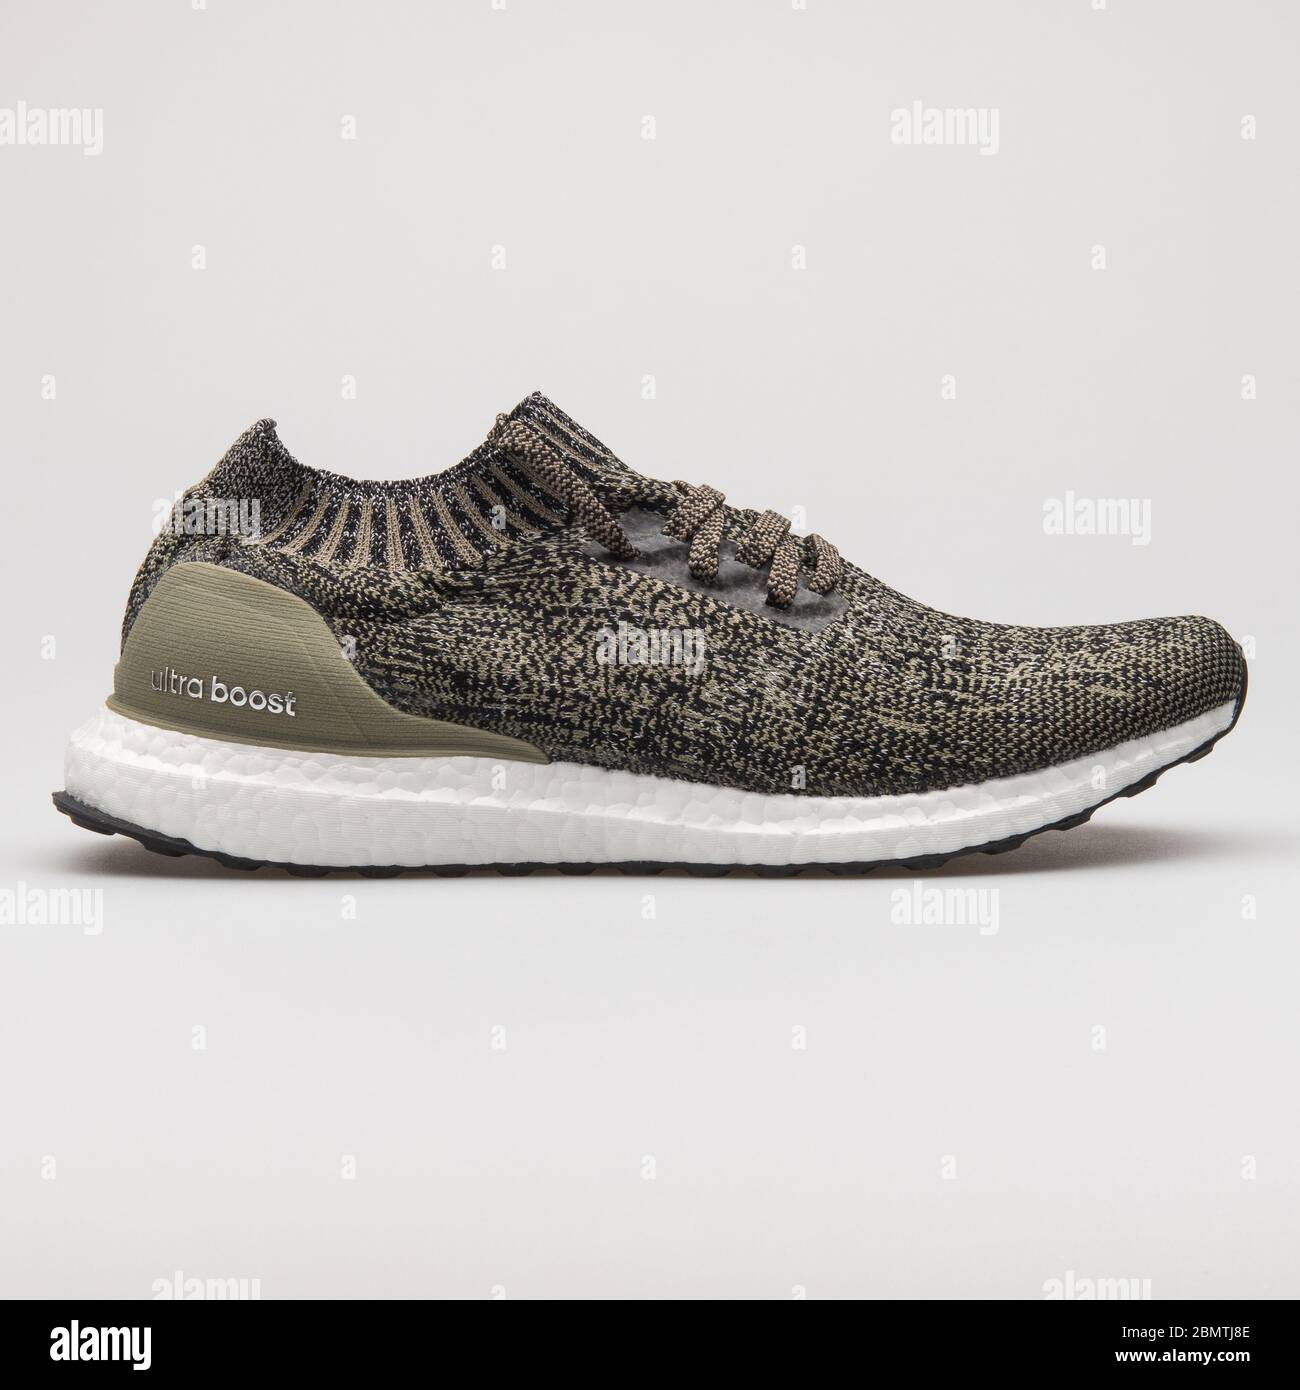 VIENNA, AUSTRIA - FEBRUARY 14, 2018: Adidas UltraBoost Uncaged olive green  and black sneaker on white background Stock Photo - Alamy